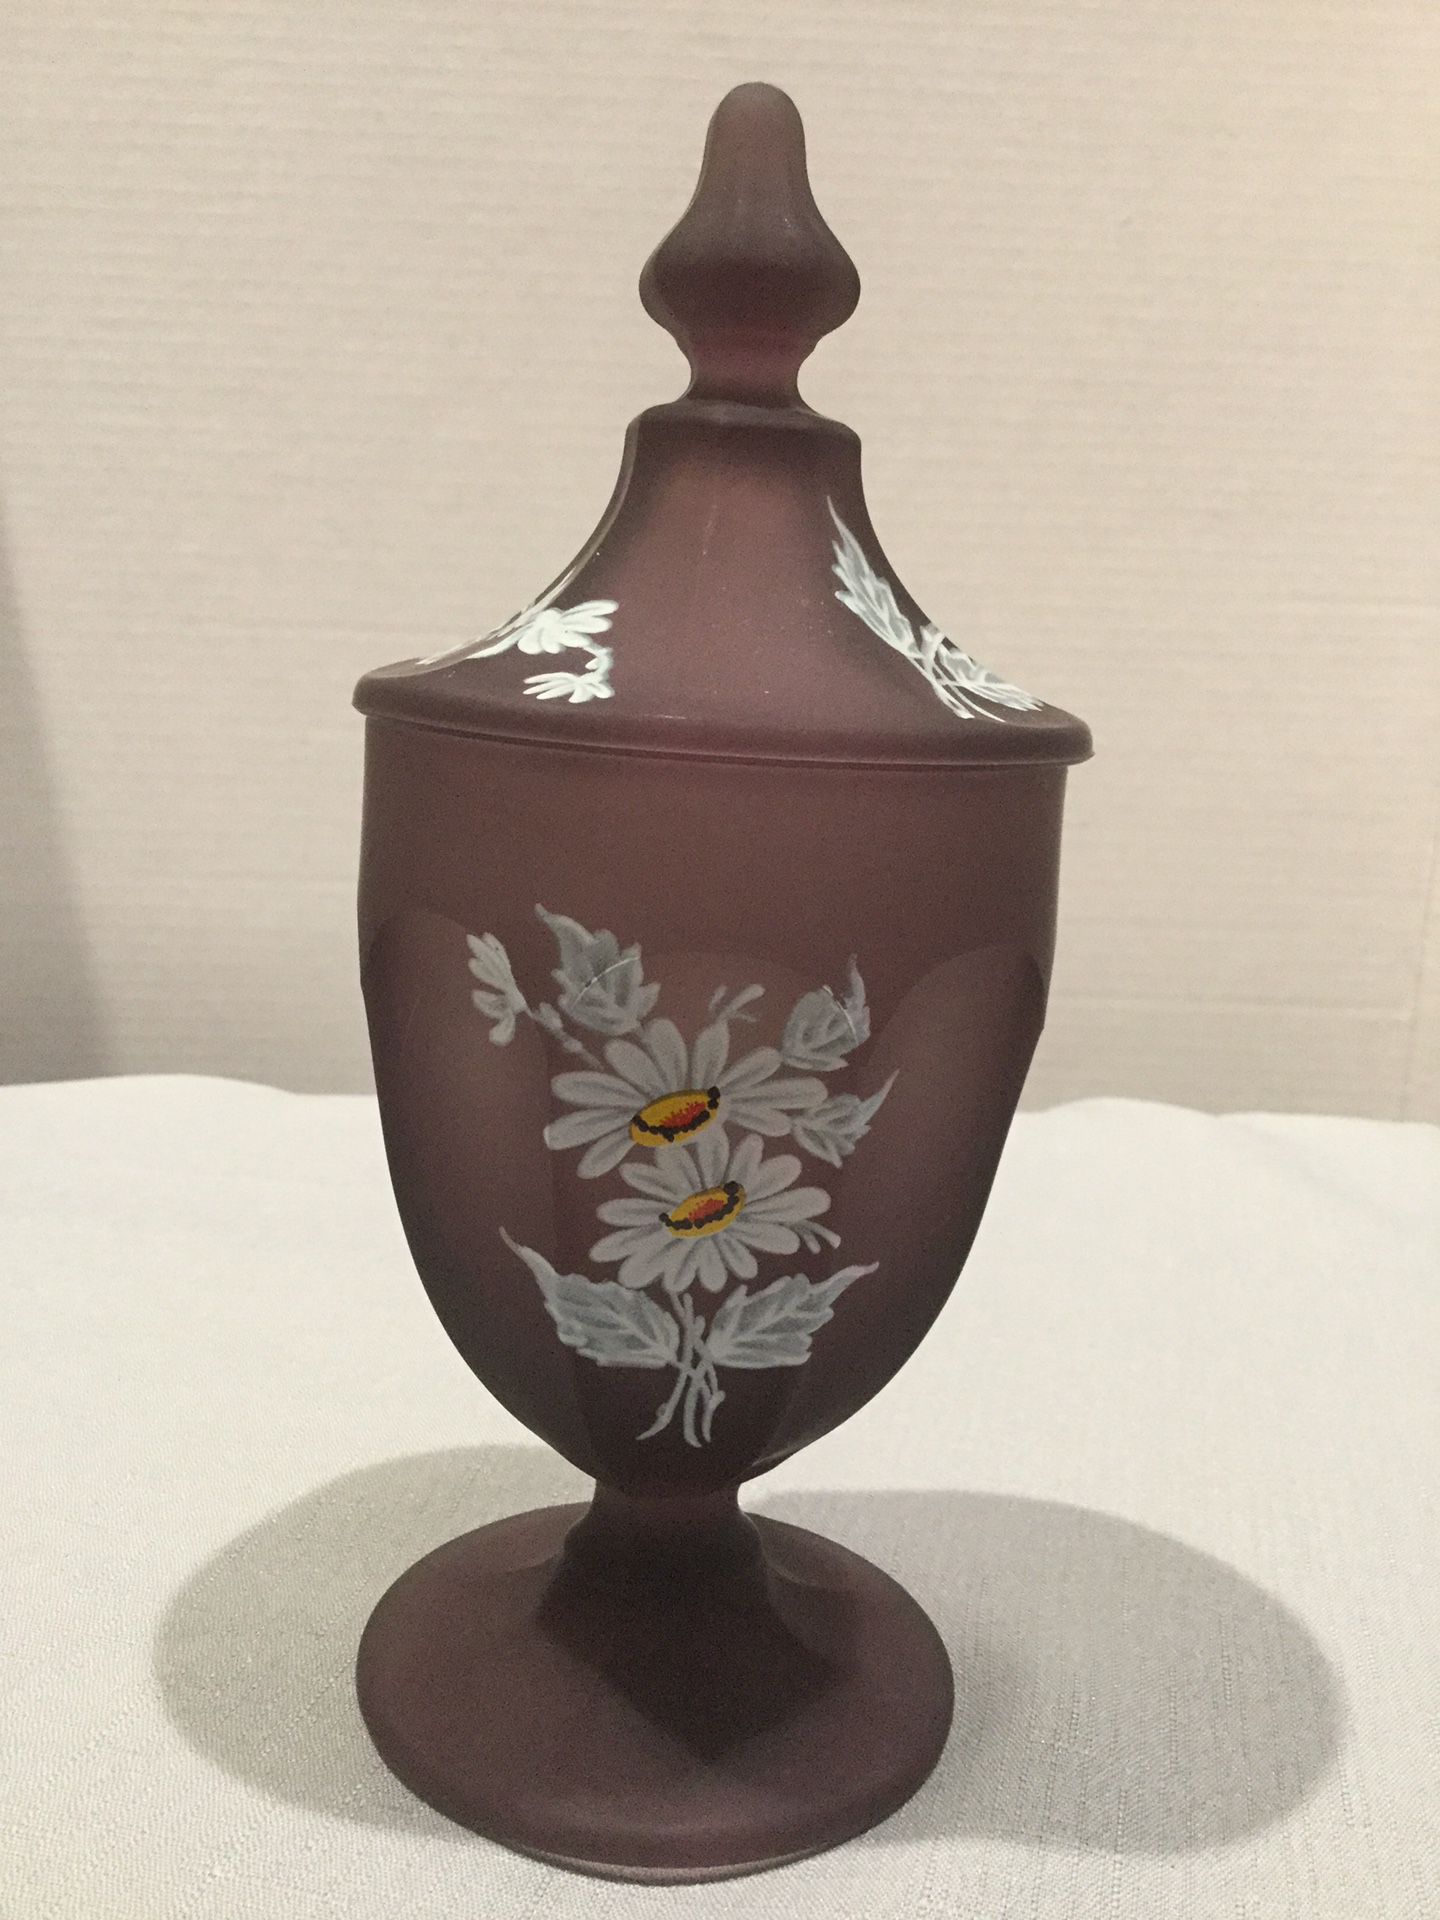 1970s WESTMORELAND BROWN MIST HAND PAINTED DAISIES FOOTED CANDY OR APOTHECARY JAR WITH LID